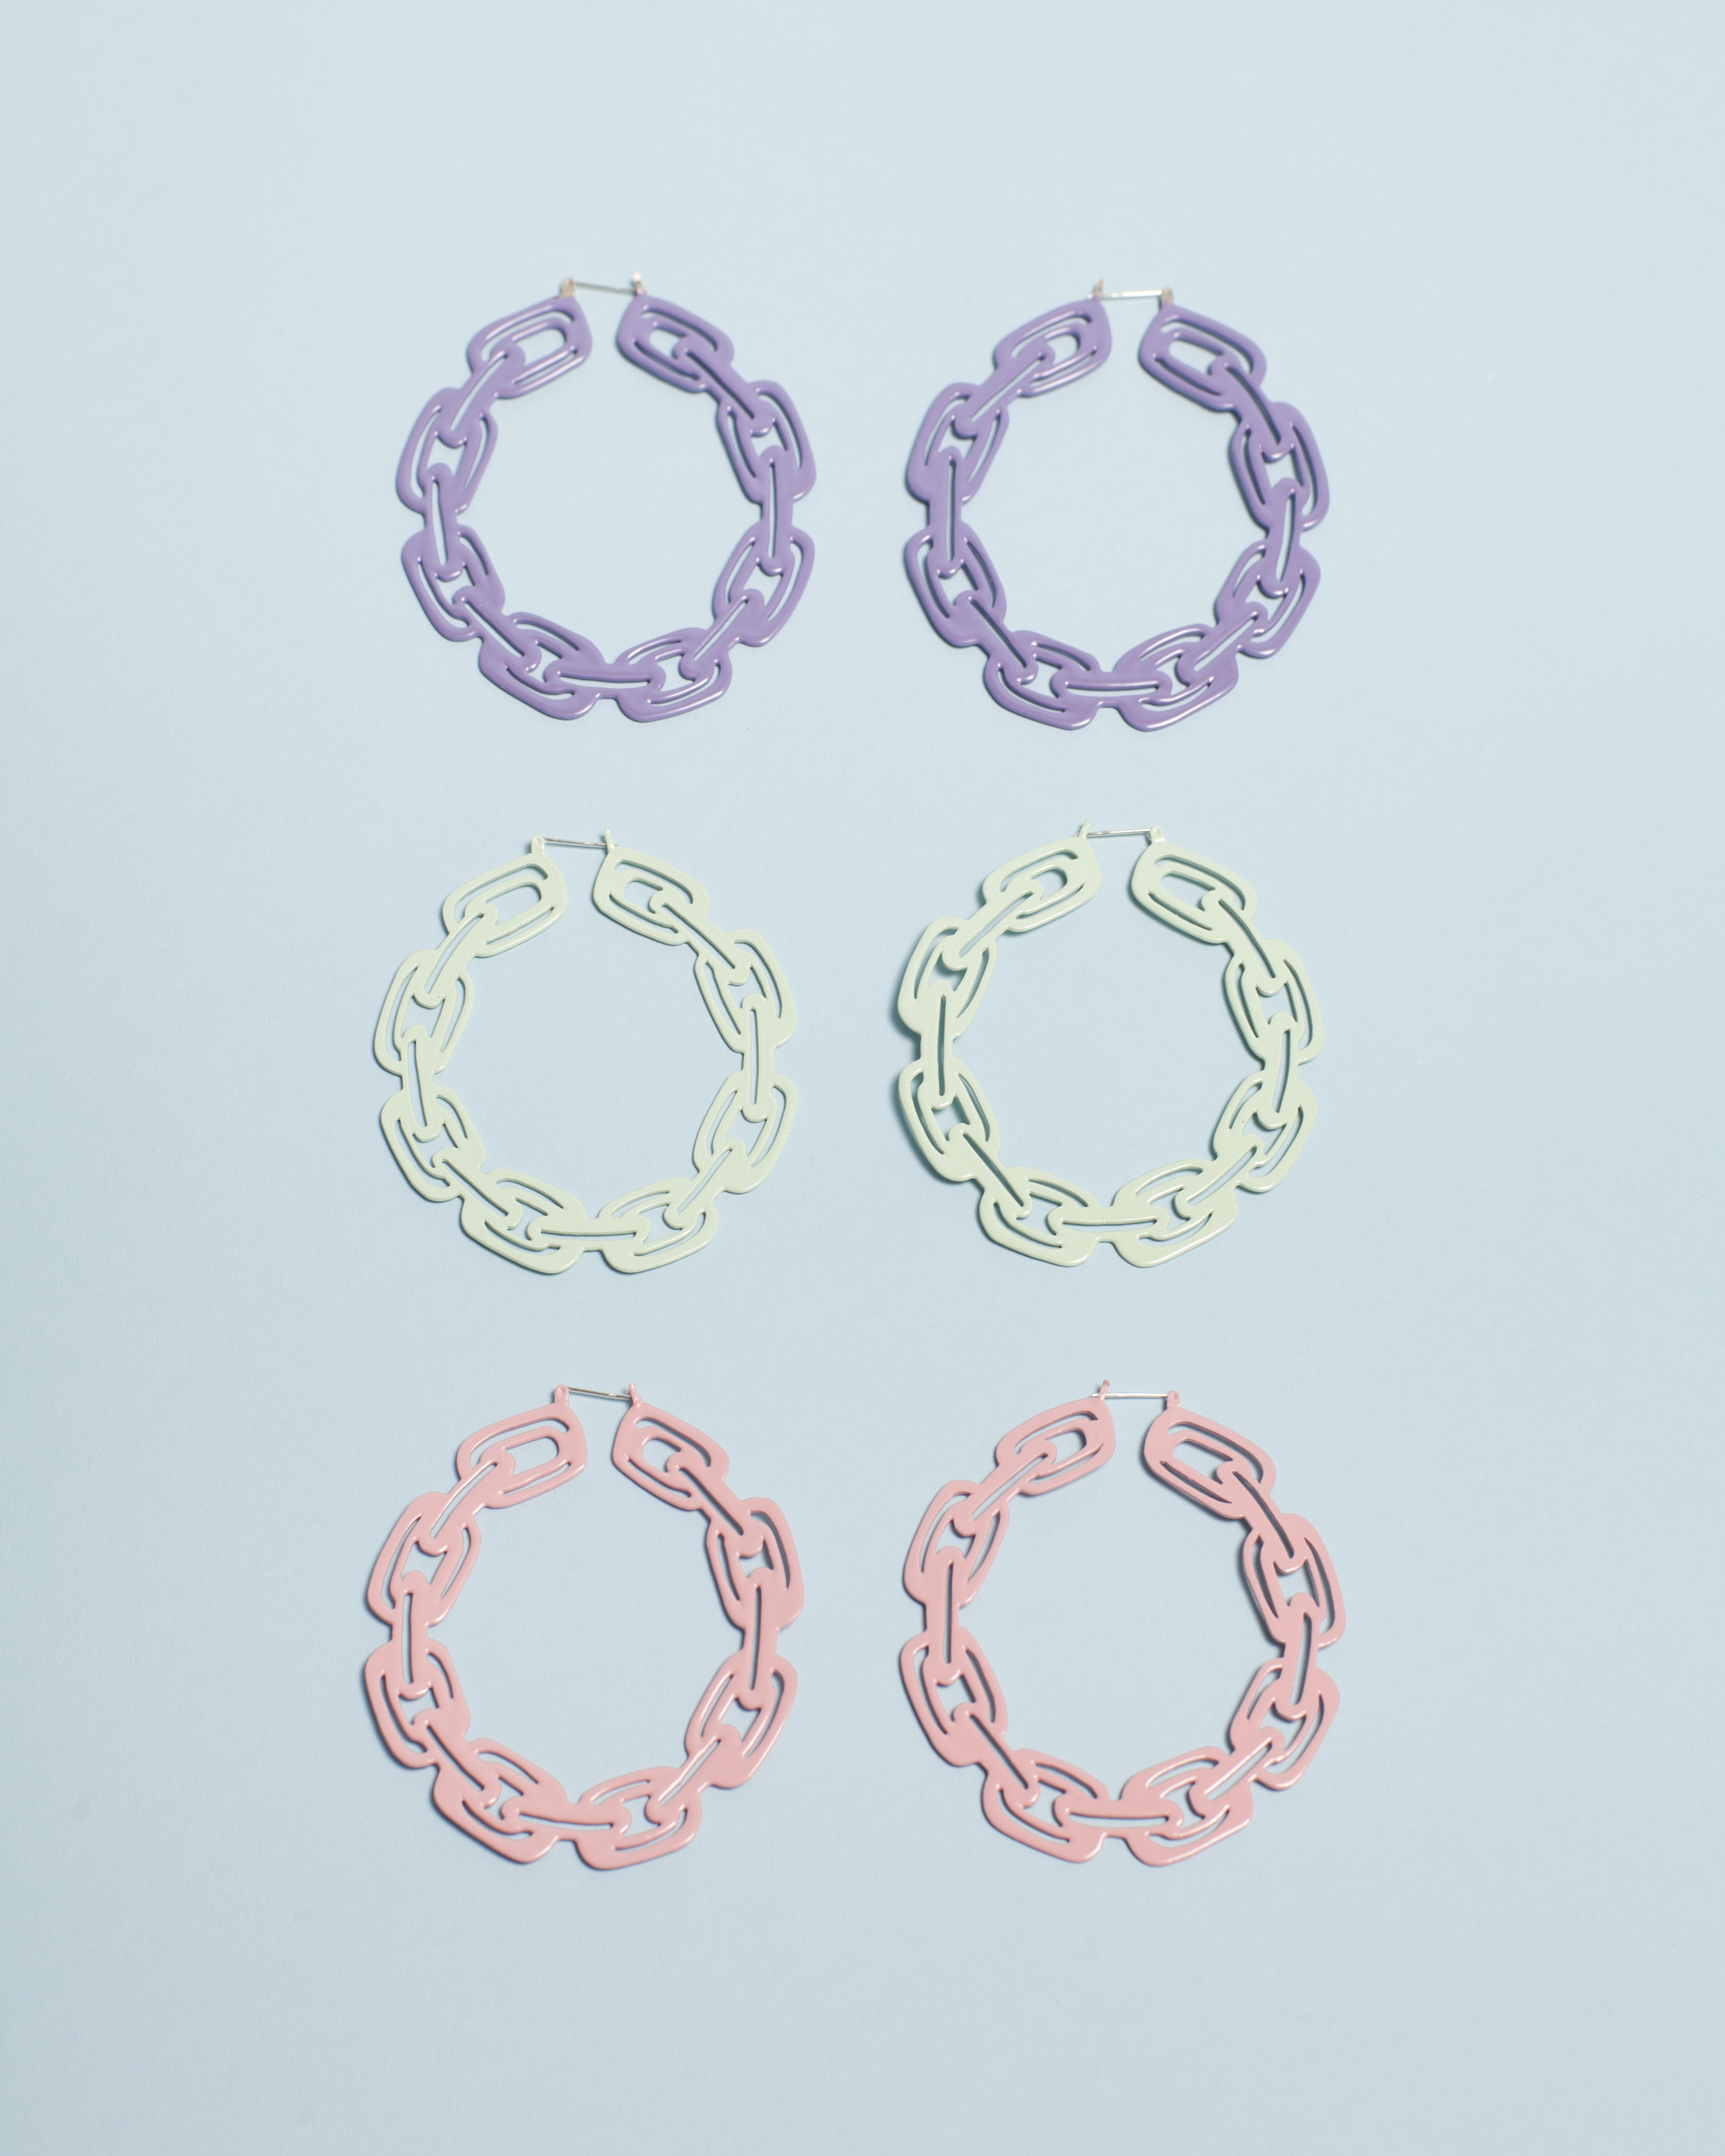   Pastel Chain Hoops   Powder-Coated Brass, Sterling Silver  3”x3”x.25”  (Mint Green, Pastel Purple, Pastel Pink)    Photo by Harry Gould Harvey 